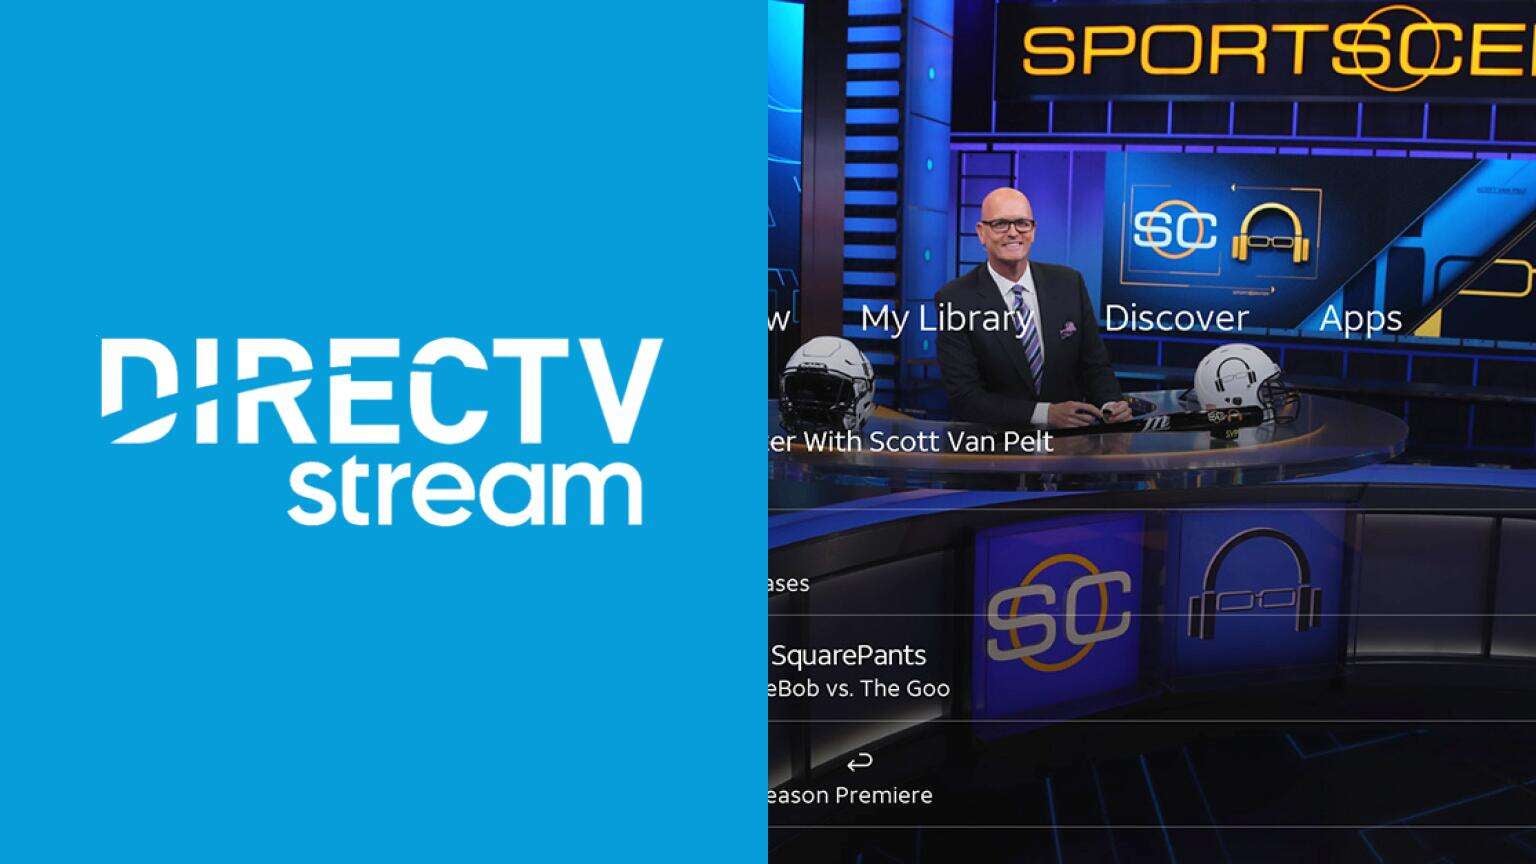 What Channels Are On Directv Stream Directv Stream Full Channel List Packages Pricing In 2021 The Streamable